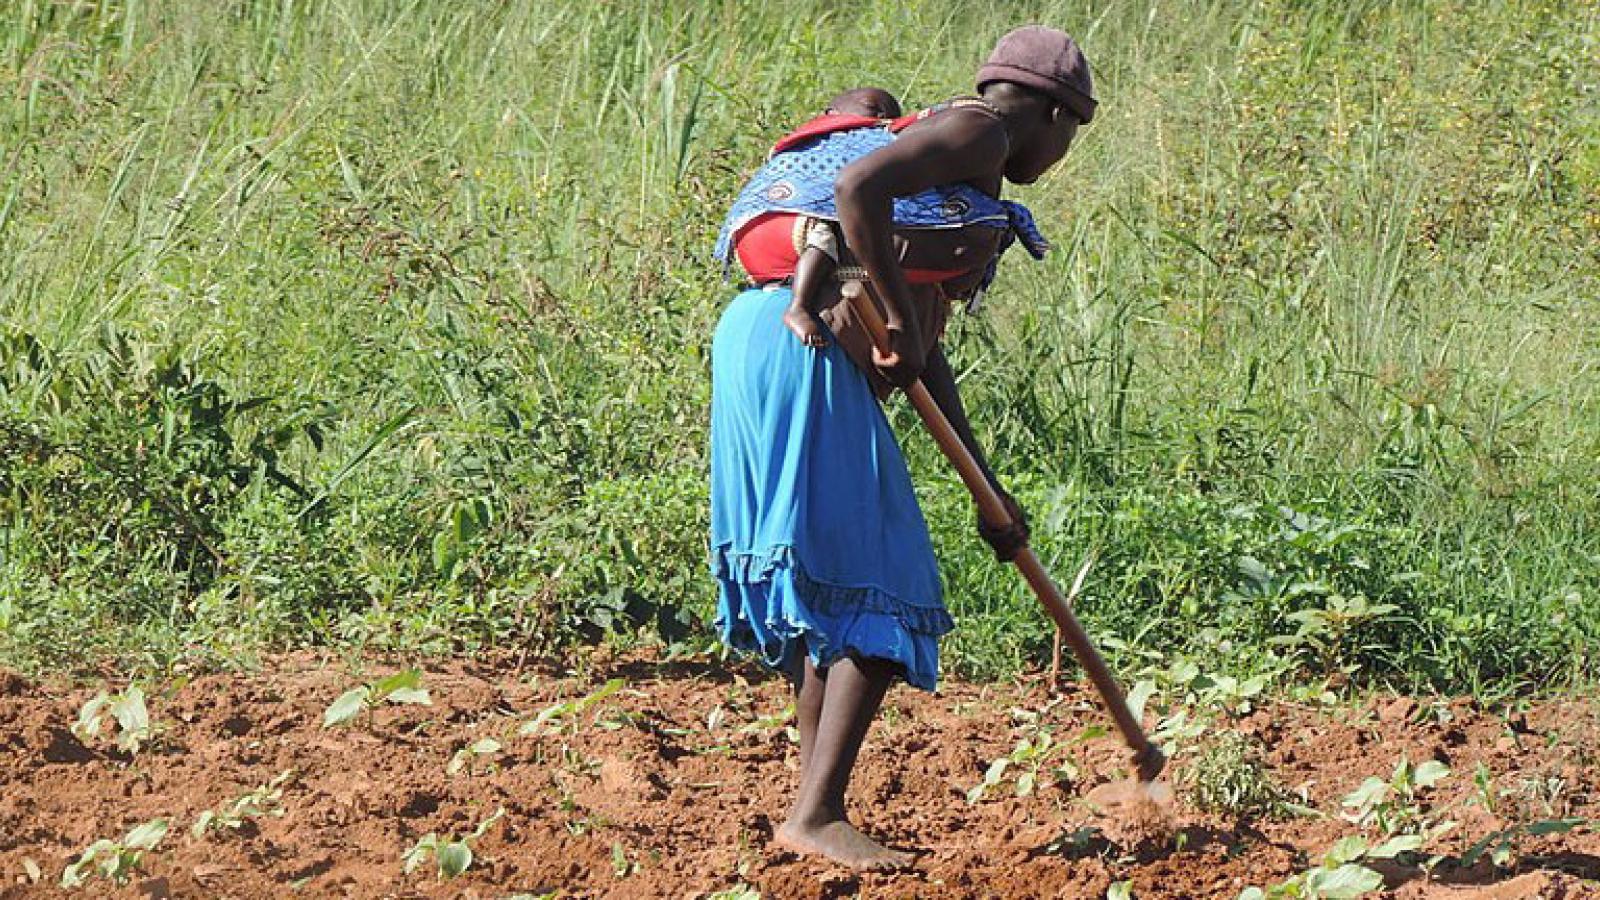 A woman hoeing a field while carrying a child on her back